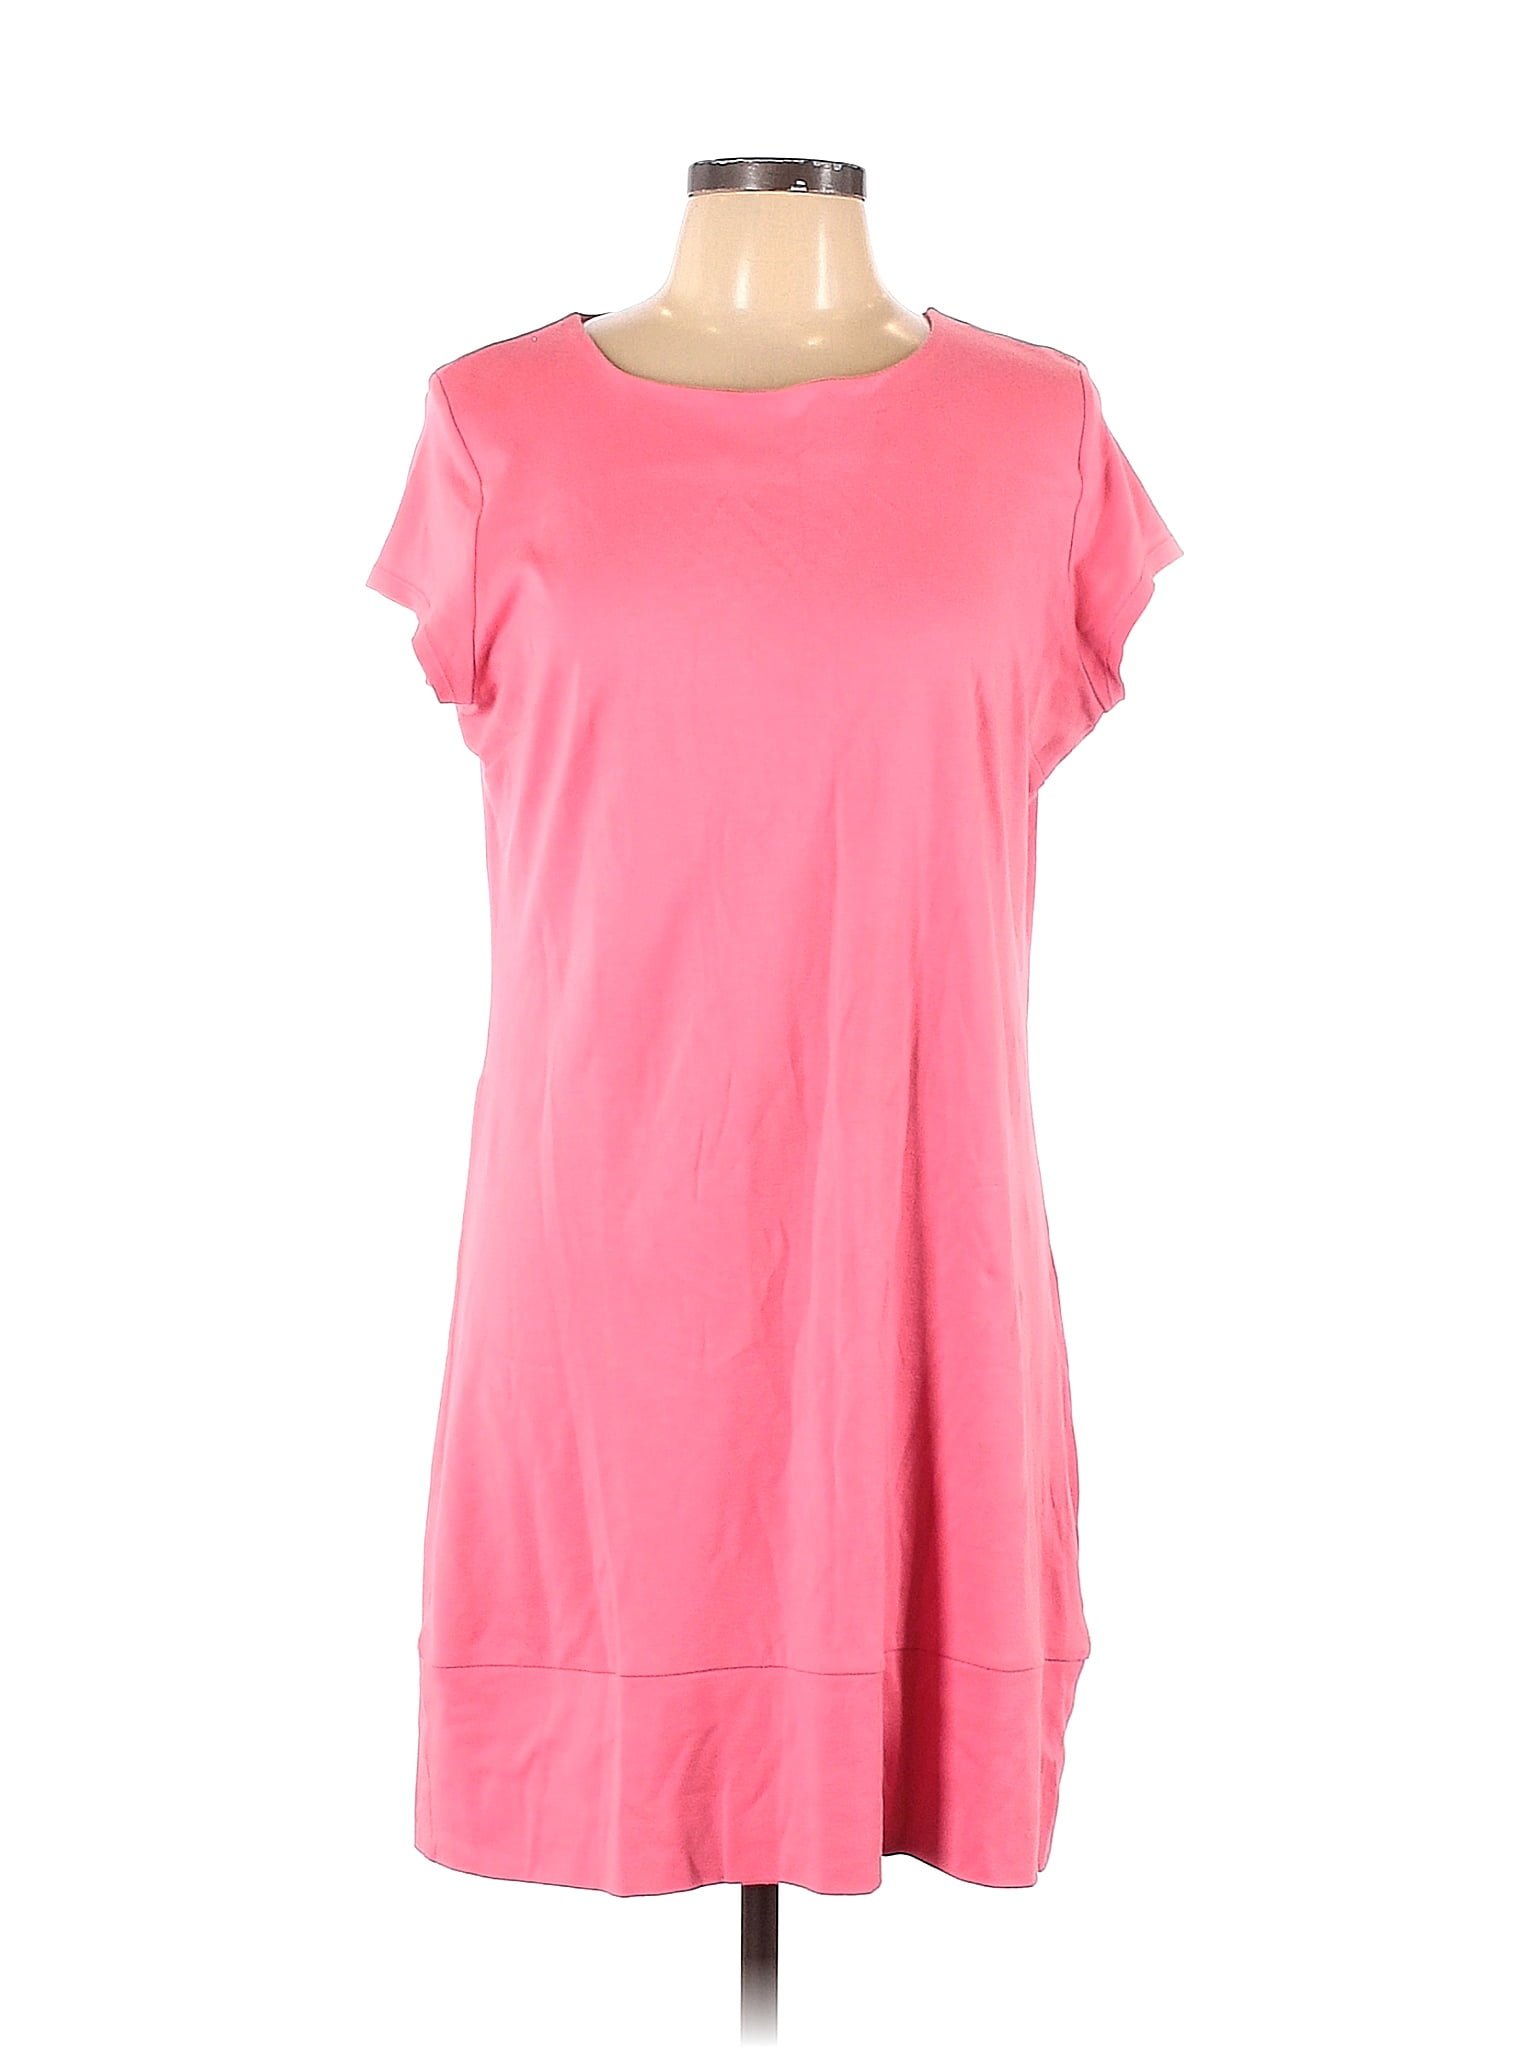 New York & Company 100% Cotton Pink Casual Dress Size L - 68% off | thredUP